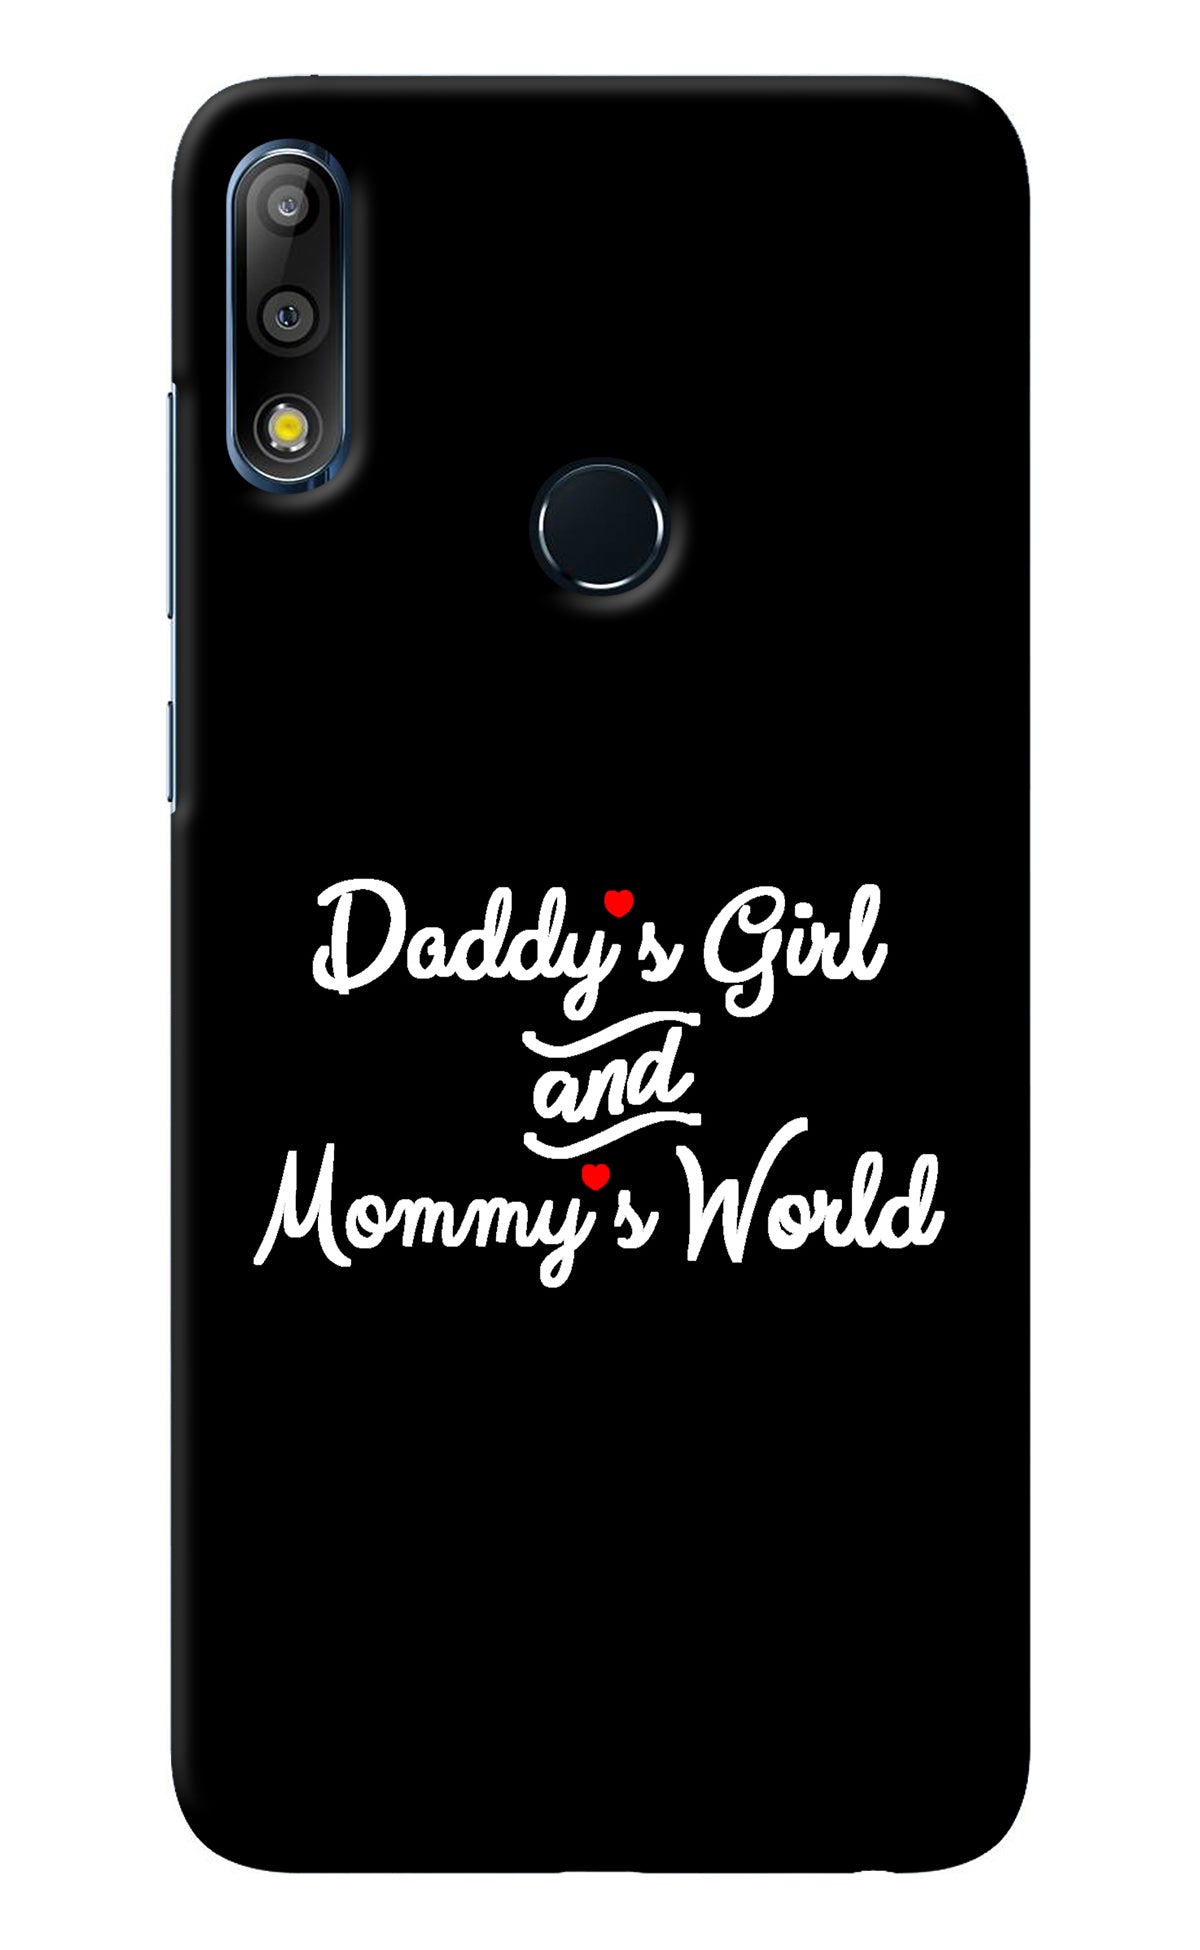 Daddy's Girl and Mommy's World Asus Zenfone Max Pro M2 Back Cover